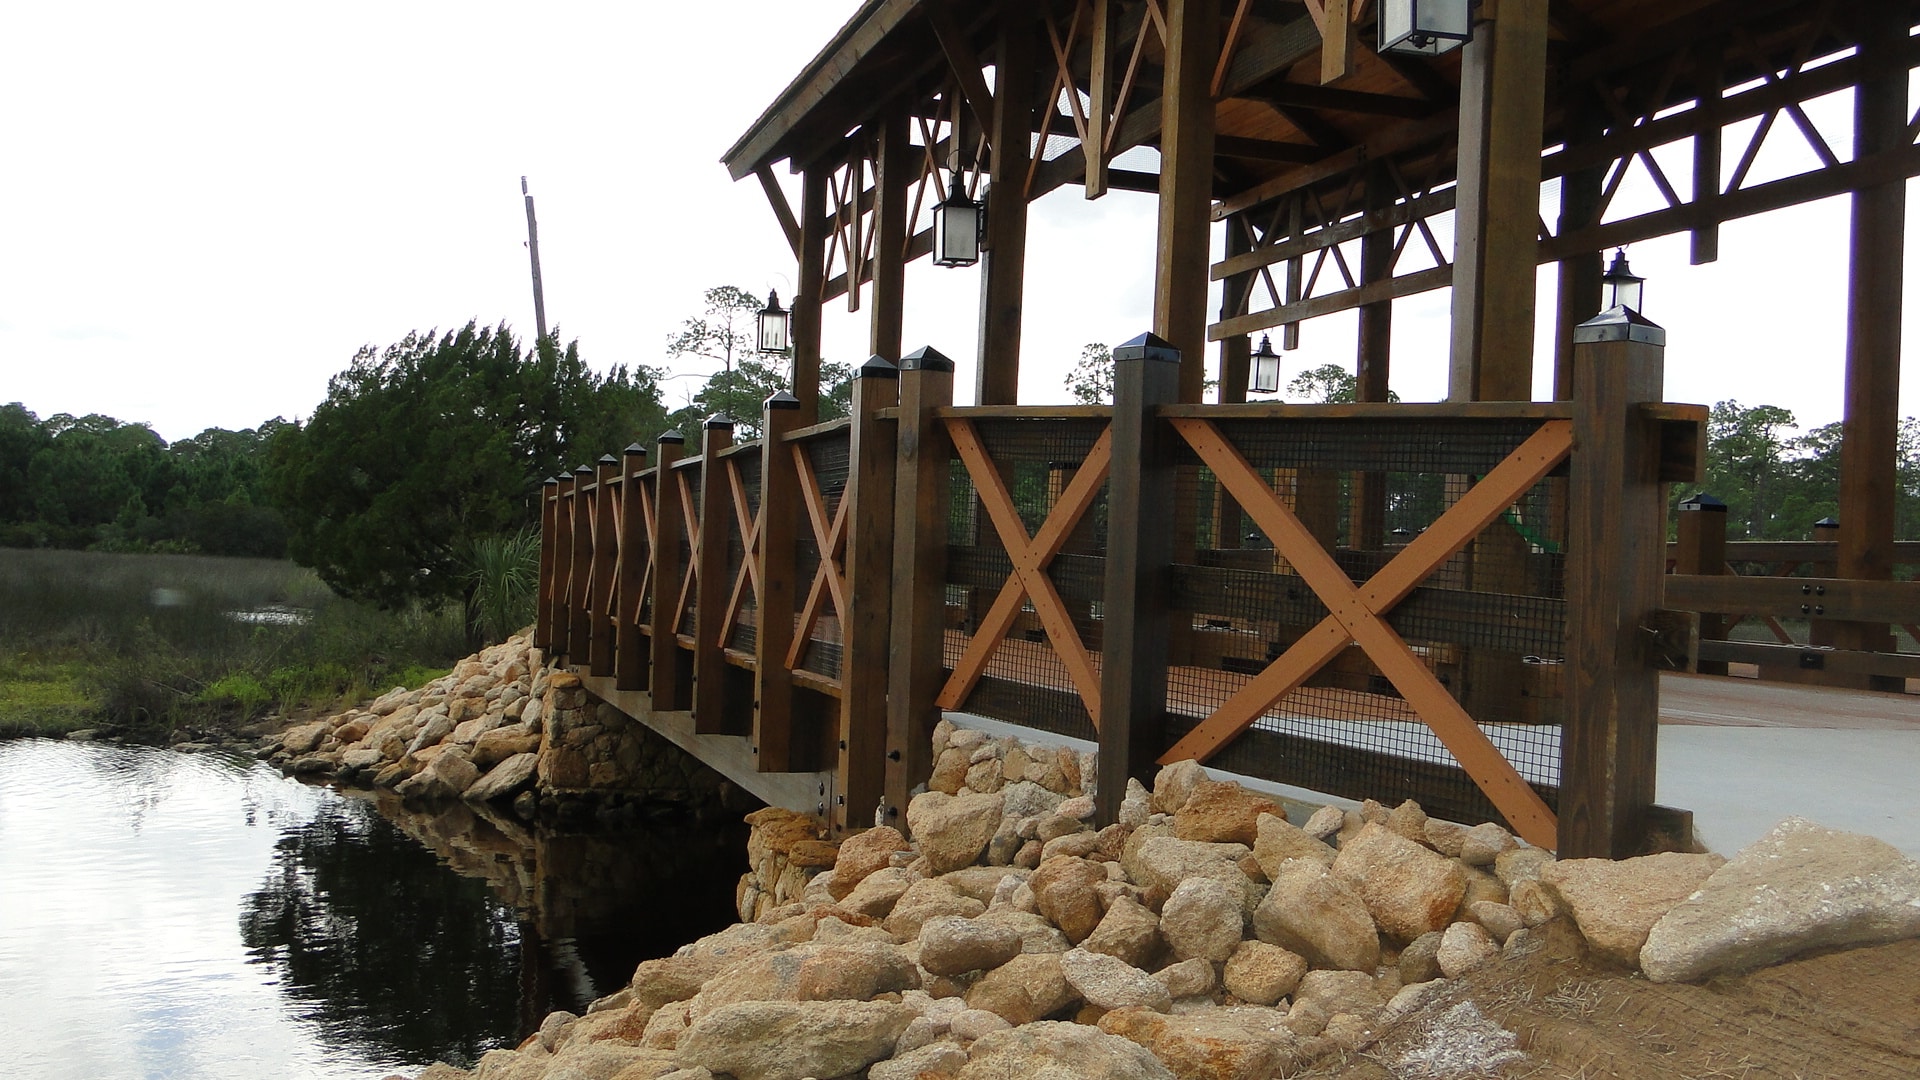 Innovation in timber bridge design with Princess Place Covered vehicular bridge in Palm Coast, FL